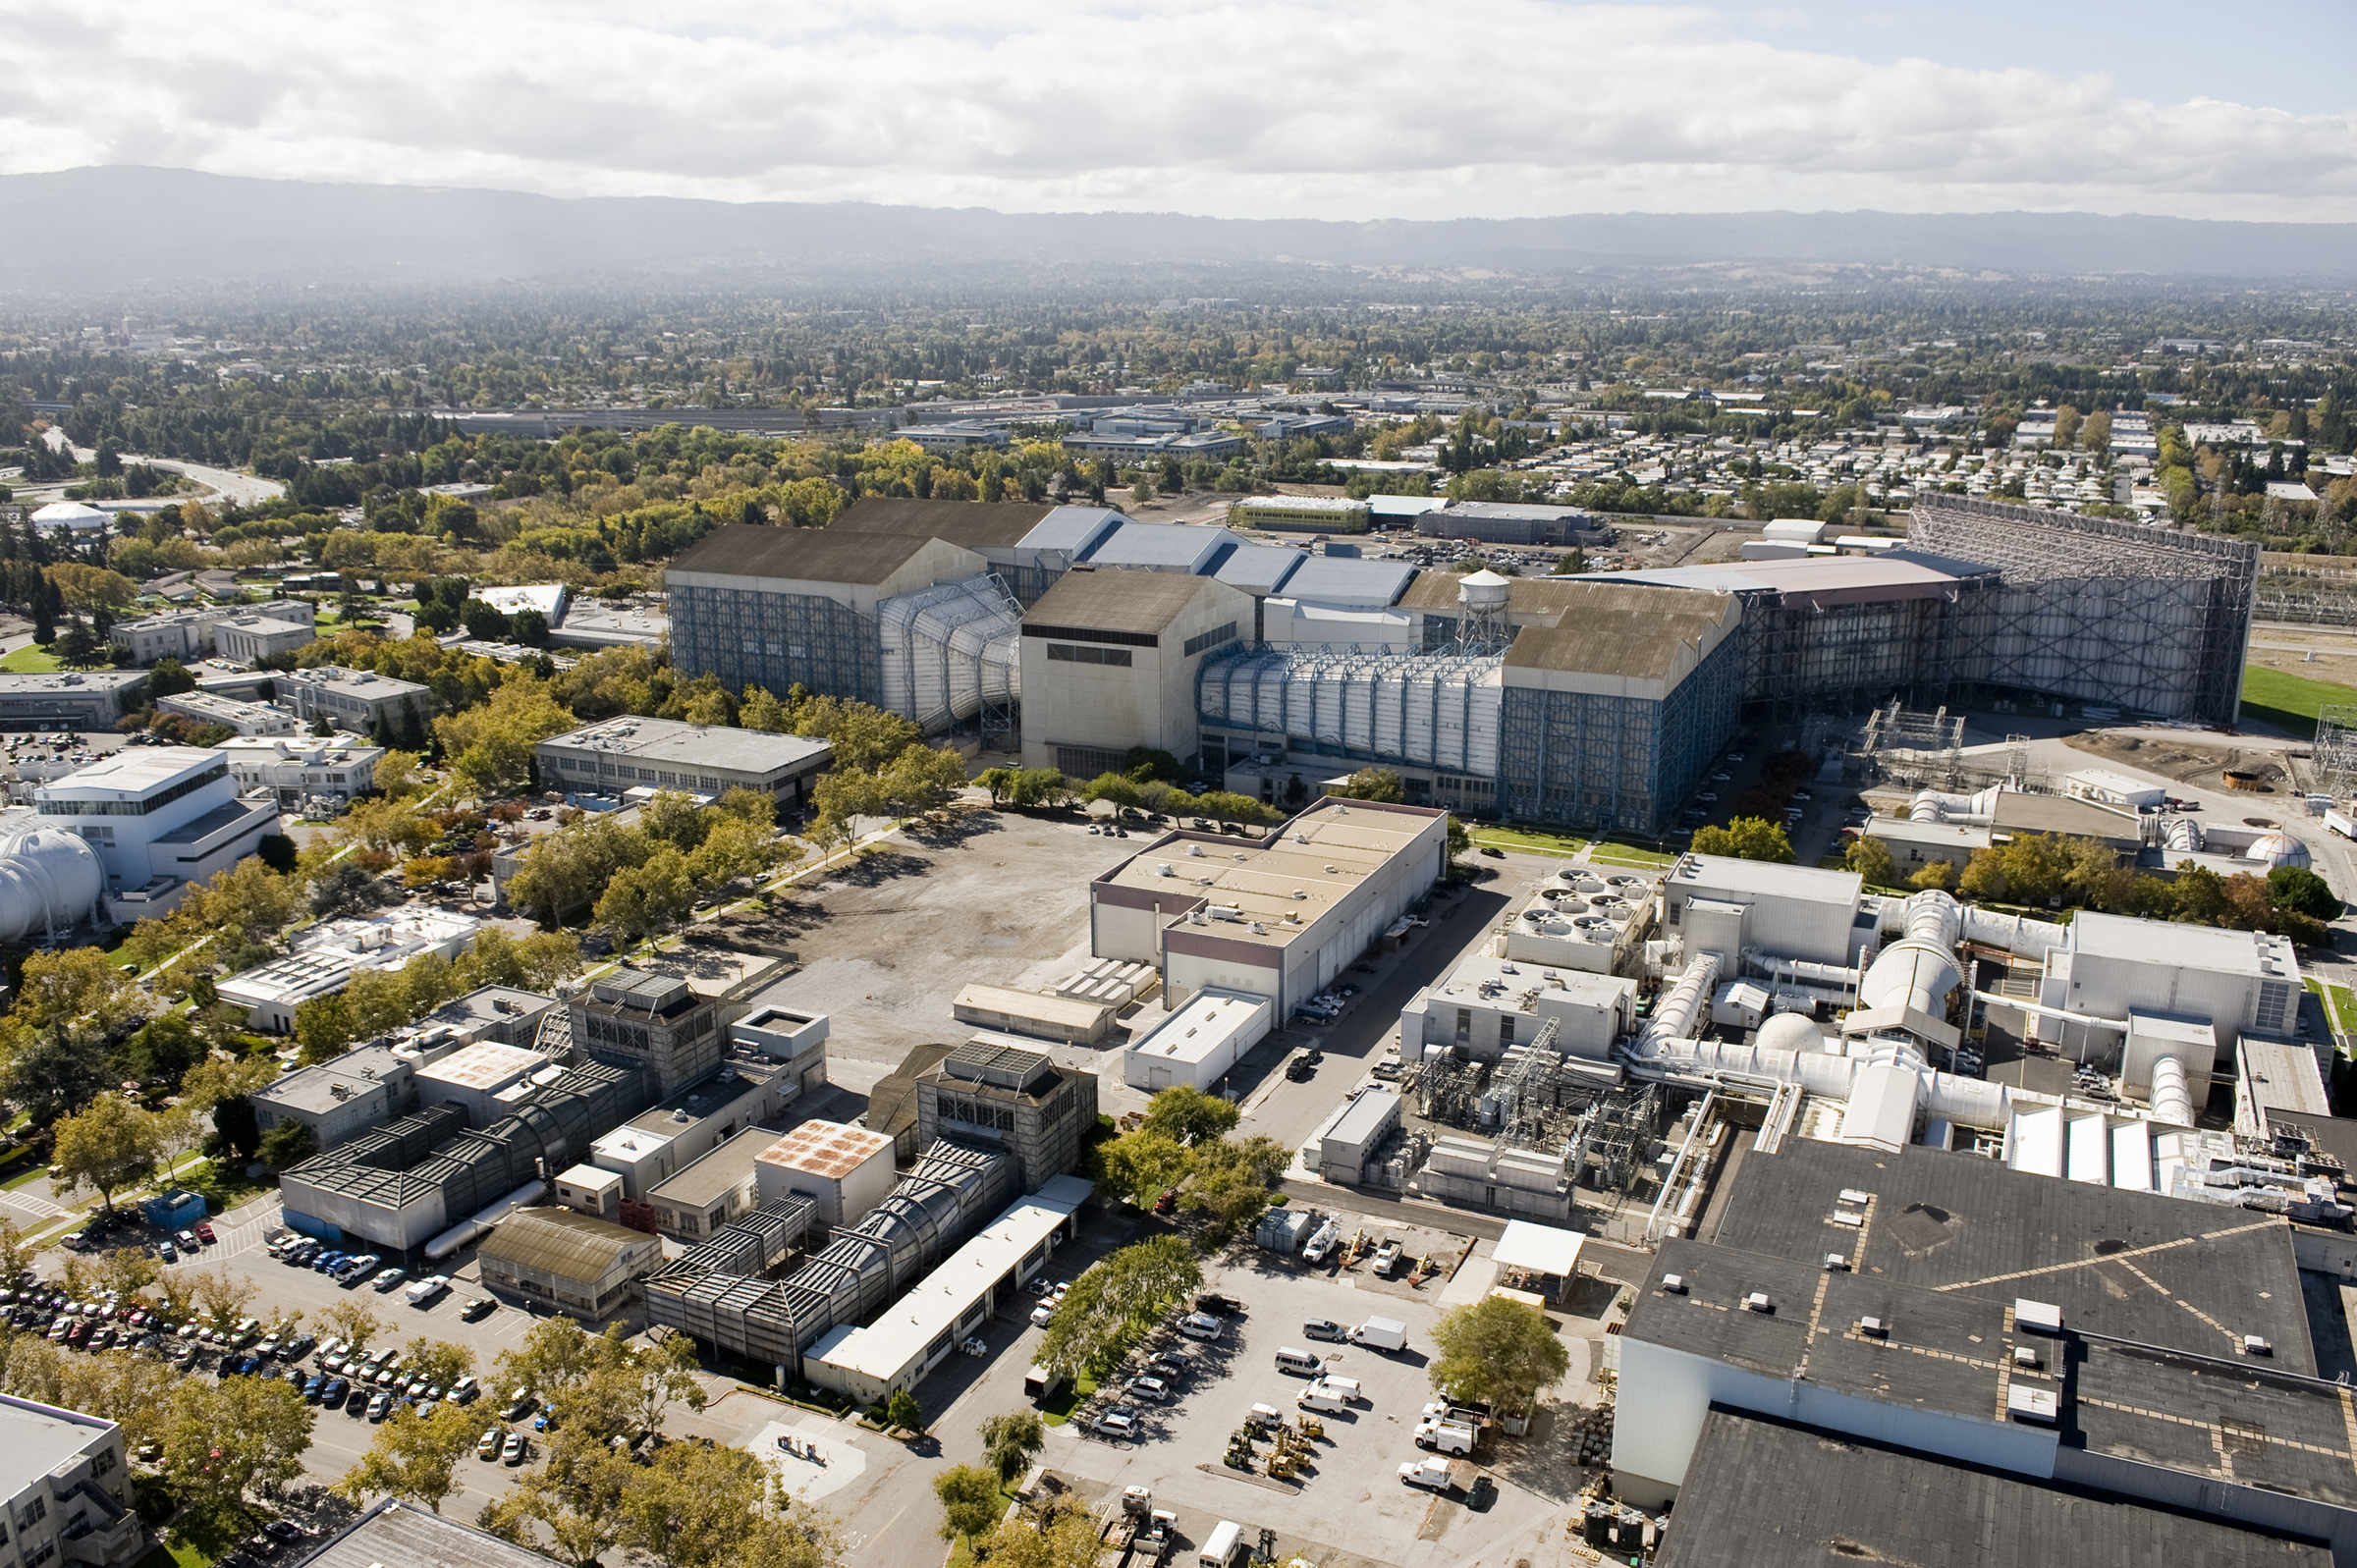 A birds-eye view of large wind tunnel buildings with long, curved chambers connected to huge industrial structures with flat and peaked roofs.